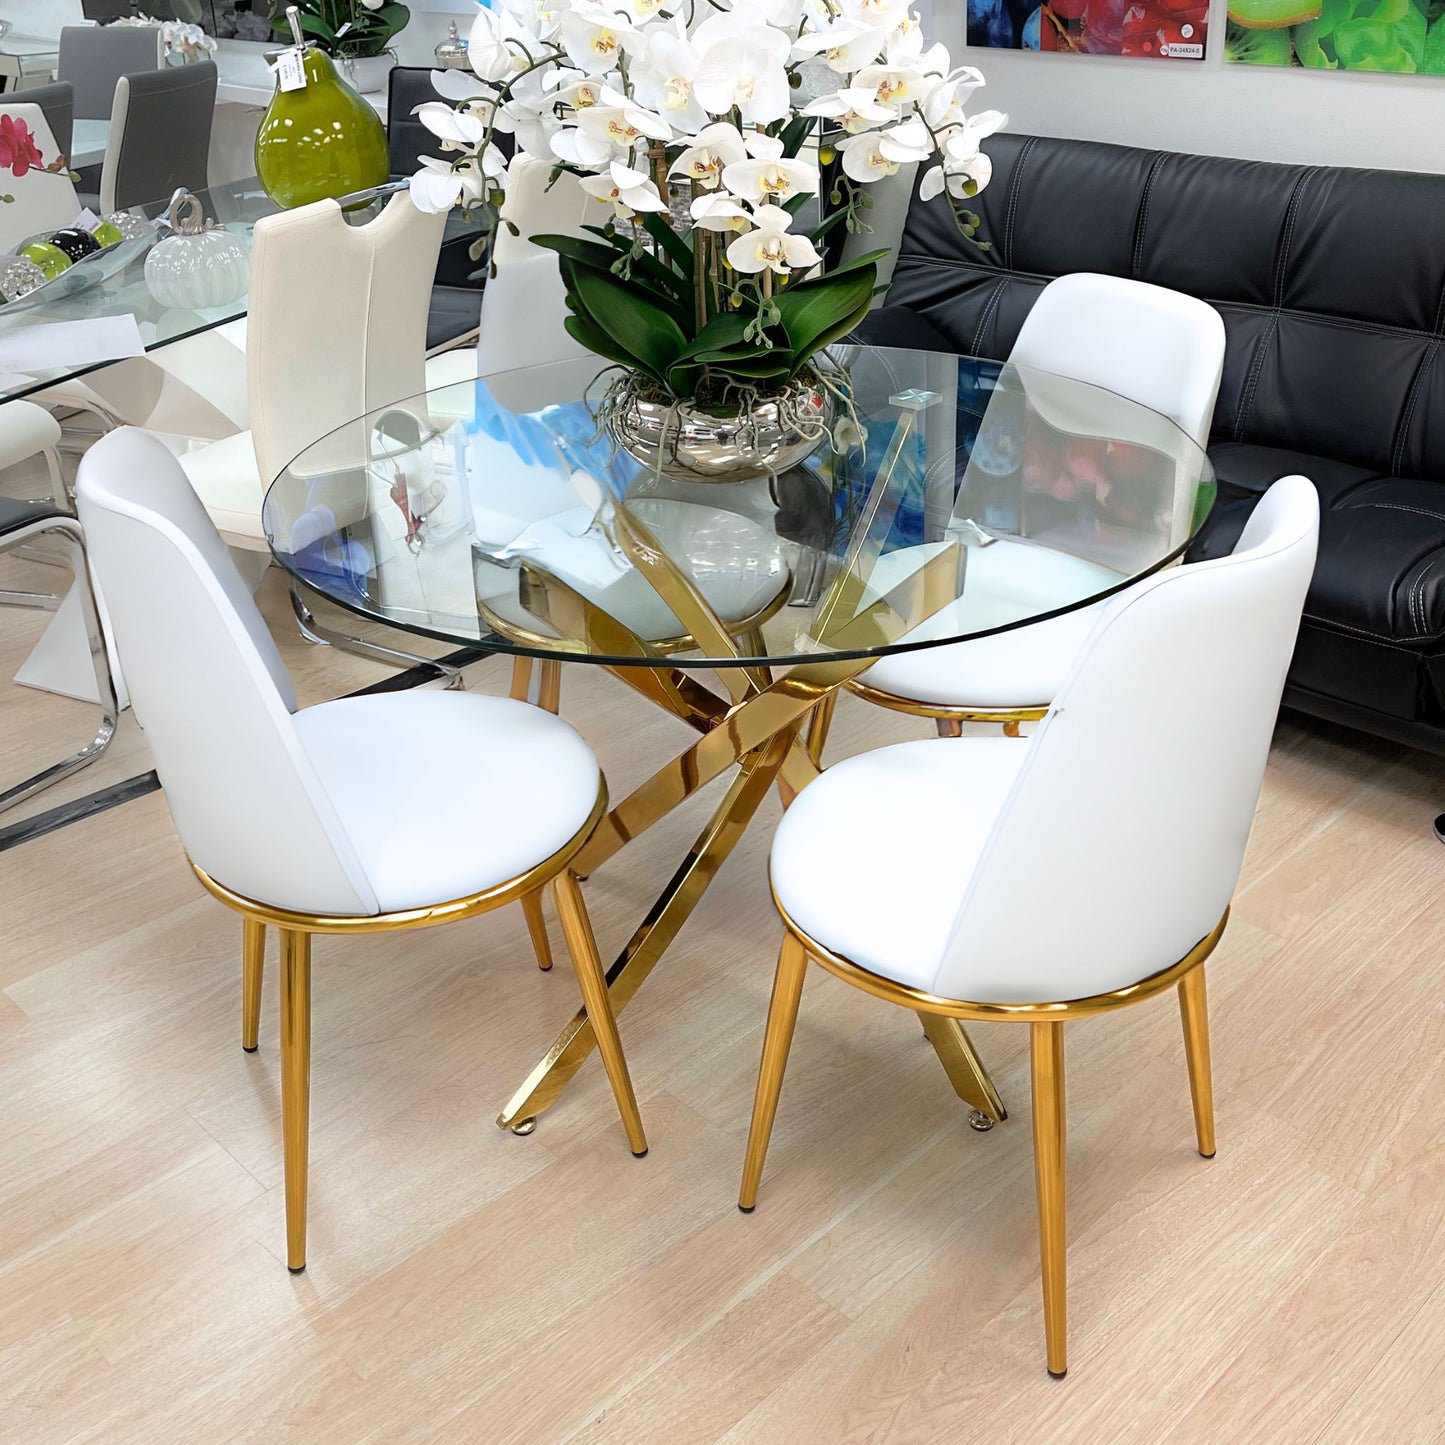 TOKIO White Dining Table and Chair Set